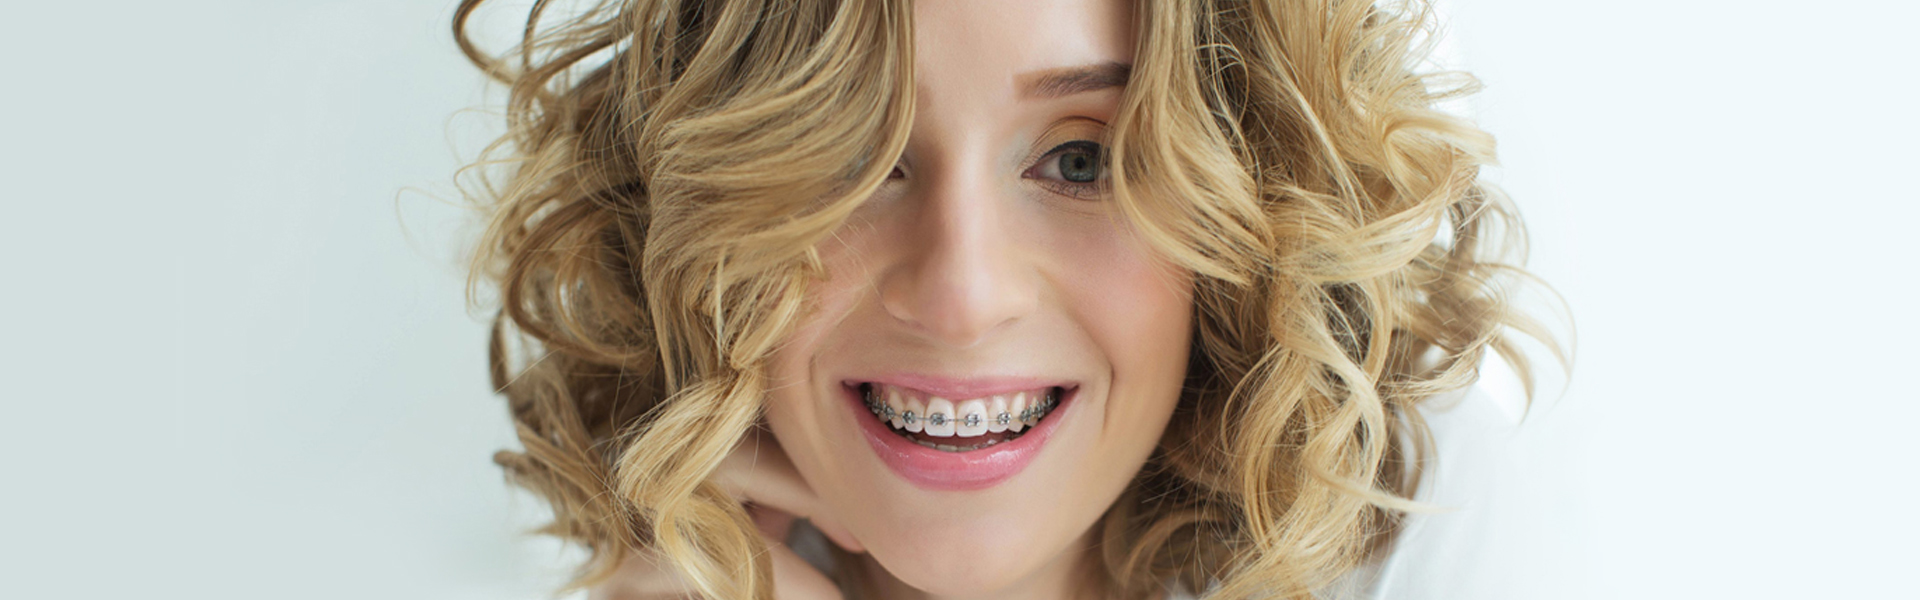 Children And Adults Can Benefit from Traditional Braces to Straighten Teeth